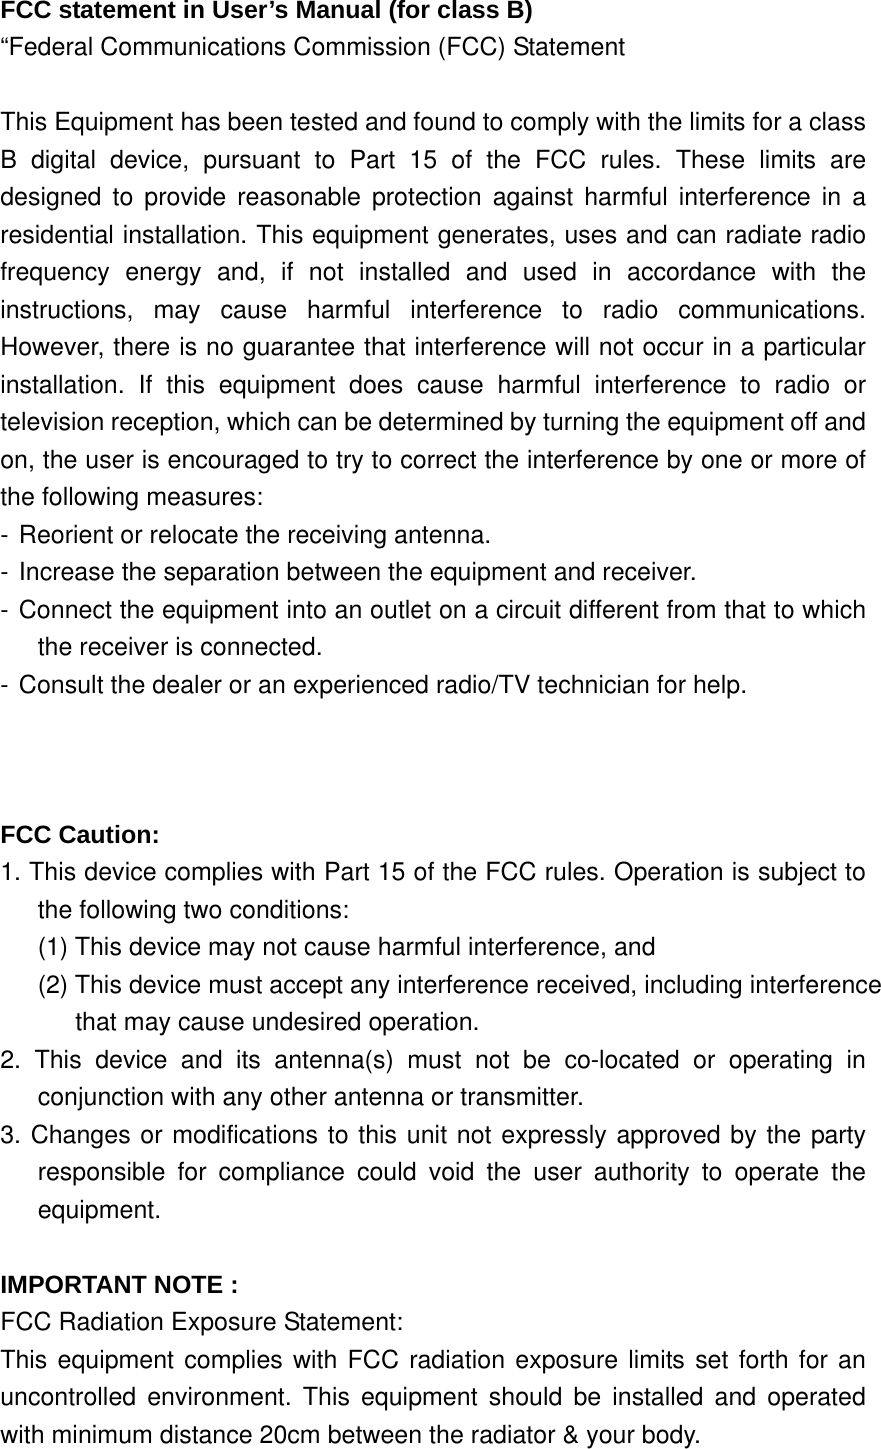 FCC statement in User’s Manual (for class B) “Federal Communications Commission (FCC) Statement  This Equipment has been tested and found to comply with the limits for a class B digital device, pursuant to Part 15 of the FCC rules. These limits are designed to provide reasonable protection against harmful interference in a residential installation. This equipment generates, uses and can radiate radio frequency energy and, if not installed and used in accordance with the instructions, may cause harmful interference to radio communications. However, there is no guarantee that interference will not occur in a particular installation. If this equipment does cause harmful interference to radio or television reception, which can be determined by turning the equipment off and on, the user is encouraged to try to correct the interference by one or more of the following measures: - Reorient or relocate the receiving antenna. - Increase the separation between the equipment and receiver. - Connect the equipment into an outlet on a circuit different from that to which the receiver is connected. - Consult the dealer or an experienced radio/TV technician for help.    FCC Caution:     1. This device complies with Part 15 of the FCC rules. Operation is subject to the following two conditions:   (1) This device may not cause harmful interference, and   (2) This device must accept any interference received, including interference that may cause undesired operation.     2. This device and its antenna(s) must not be co-located or operating in conjunction with any other antenna or transmitter.     3. Changes or modifications to this unit not expressly approved by the party  responsible for compliance could void the user authority to operate the equipment.  IMPORTANT NOTE : FCC Radiation Exposure Statement: This equipment complies with FCC radiation exposure limits set forth for an uncontrolled environment. This equipment should be installed and operated with minimum distance 20cm between the radiator &amp; your body.   